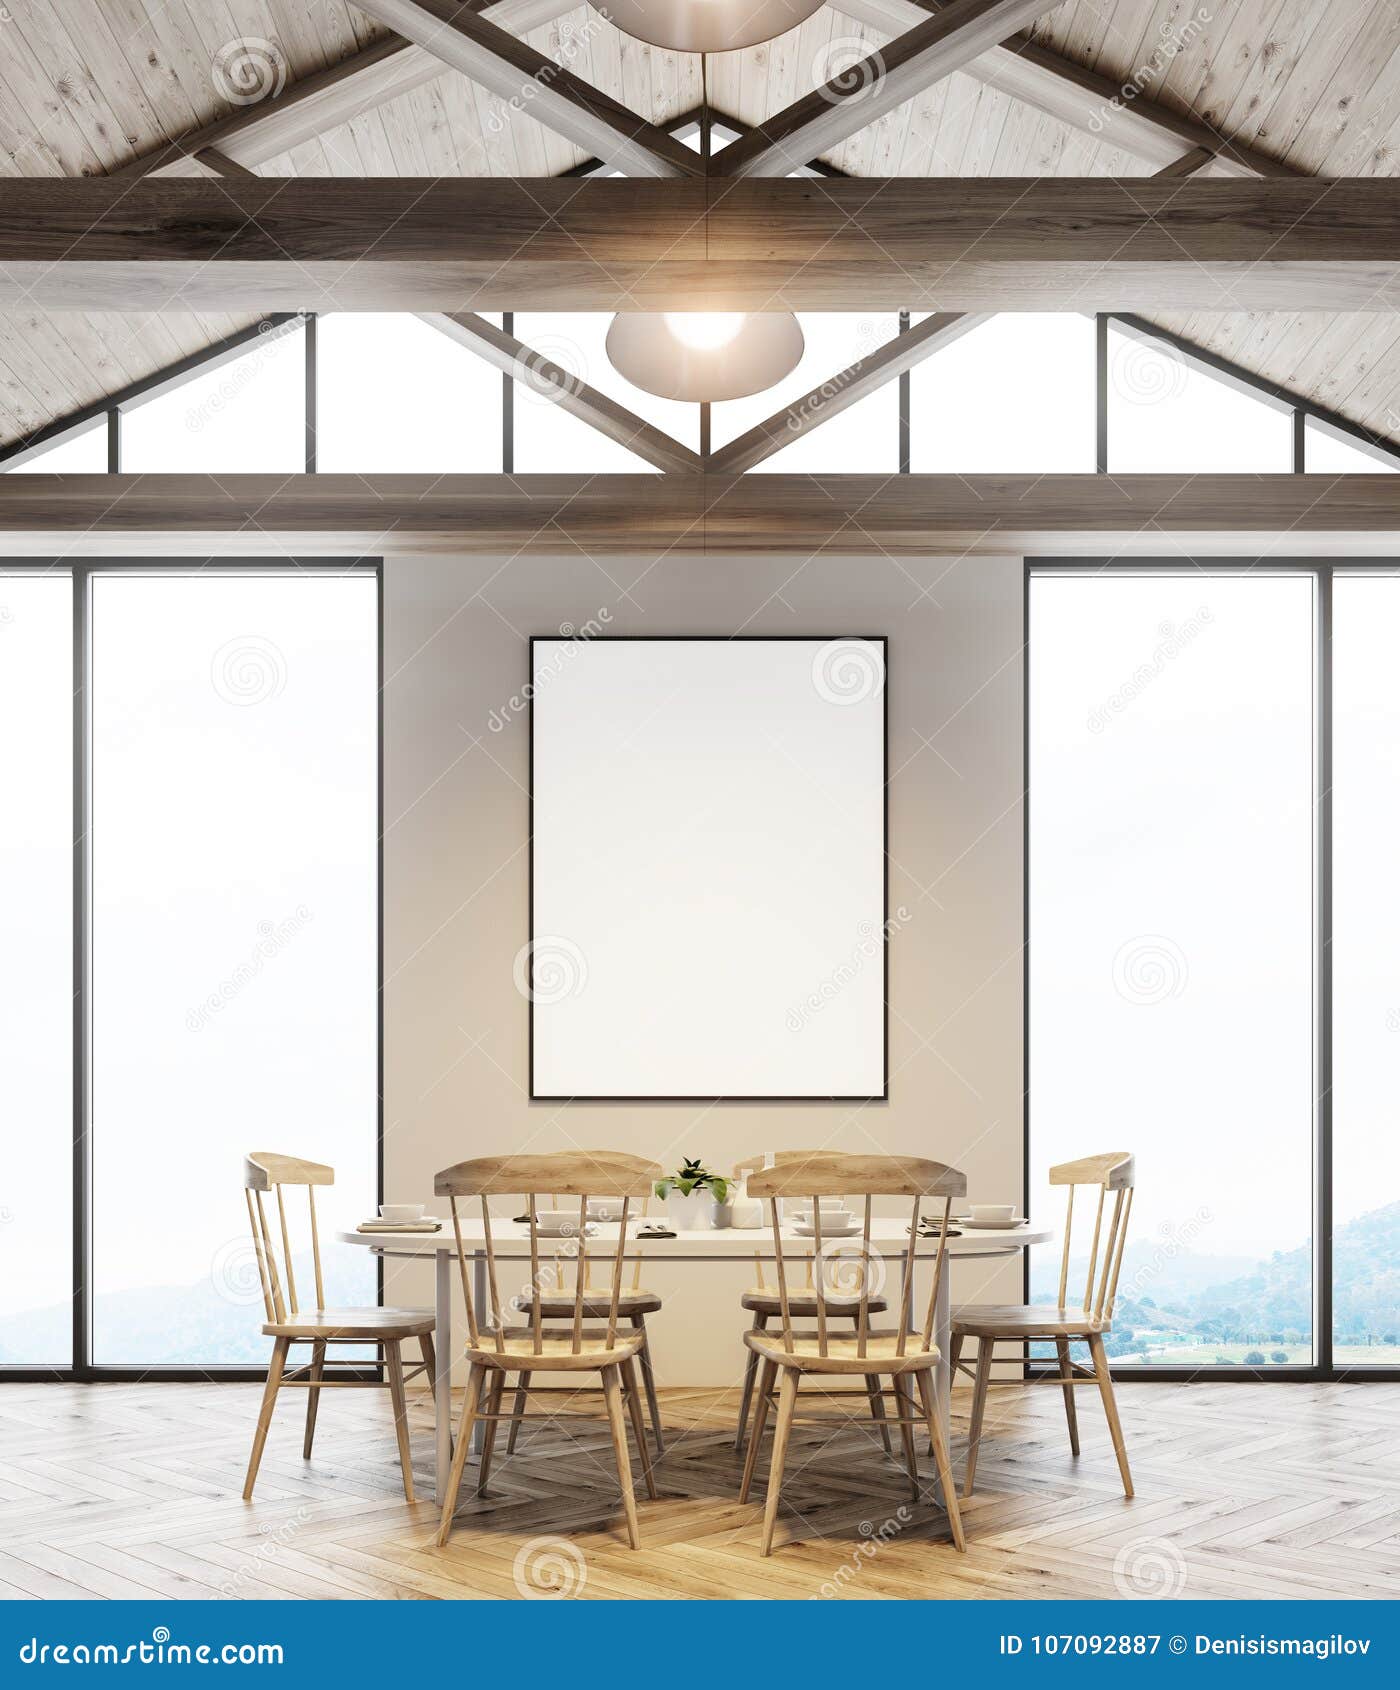 Attic Dining Room Interior Poster And Table Stock